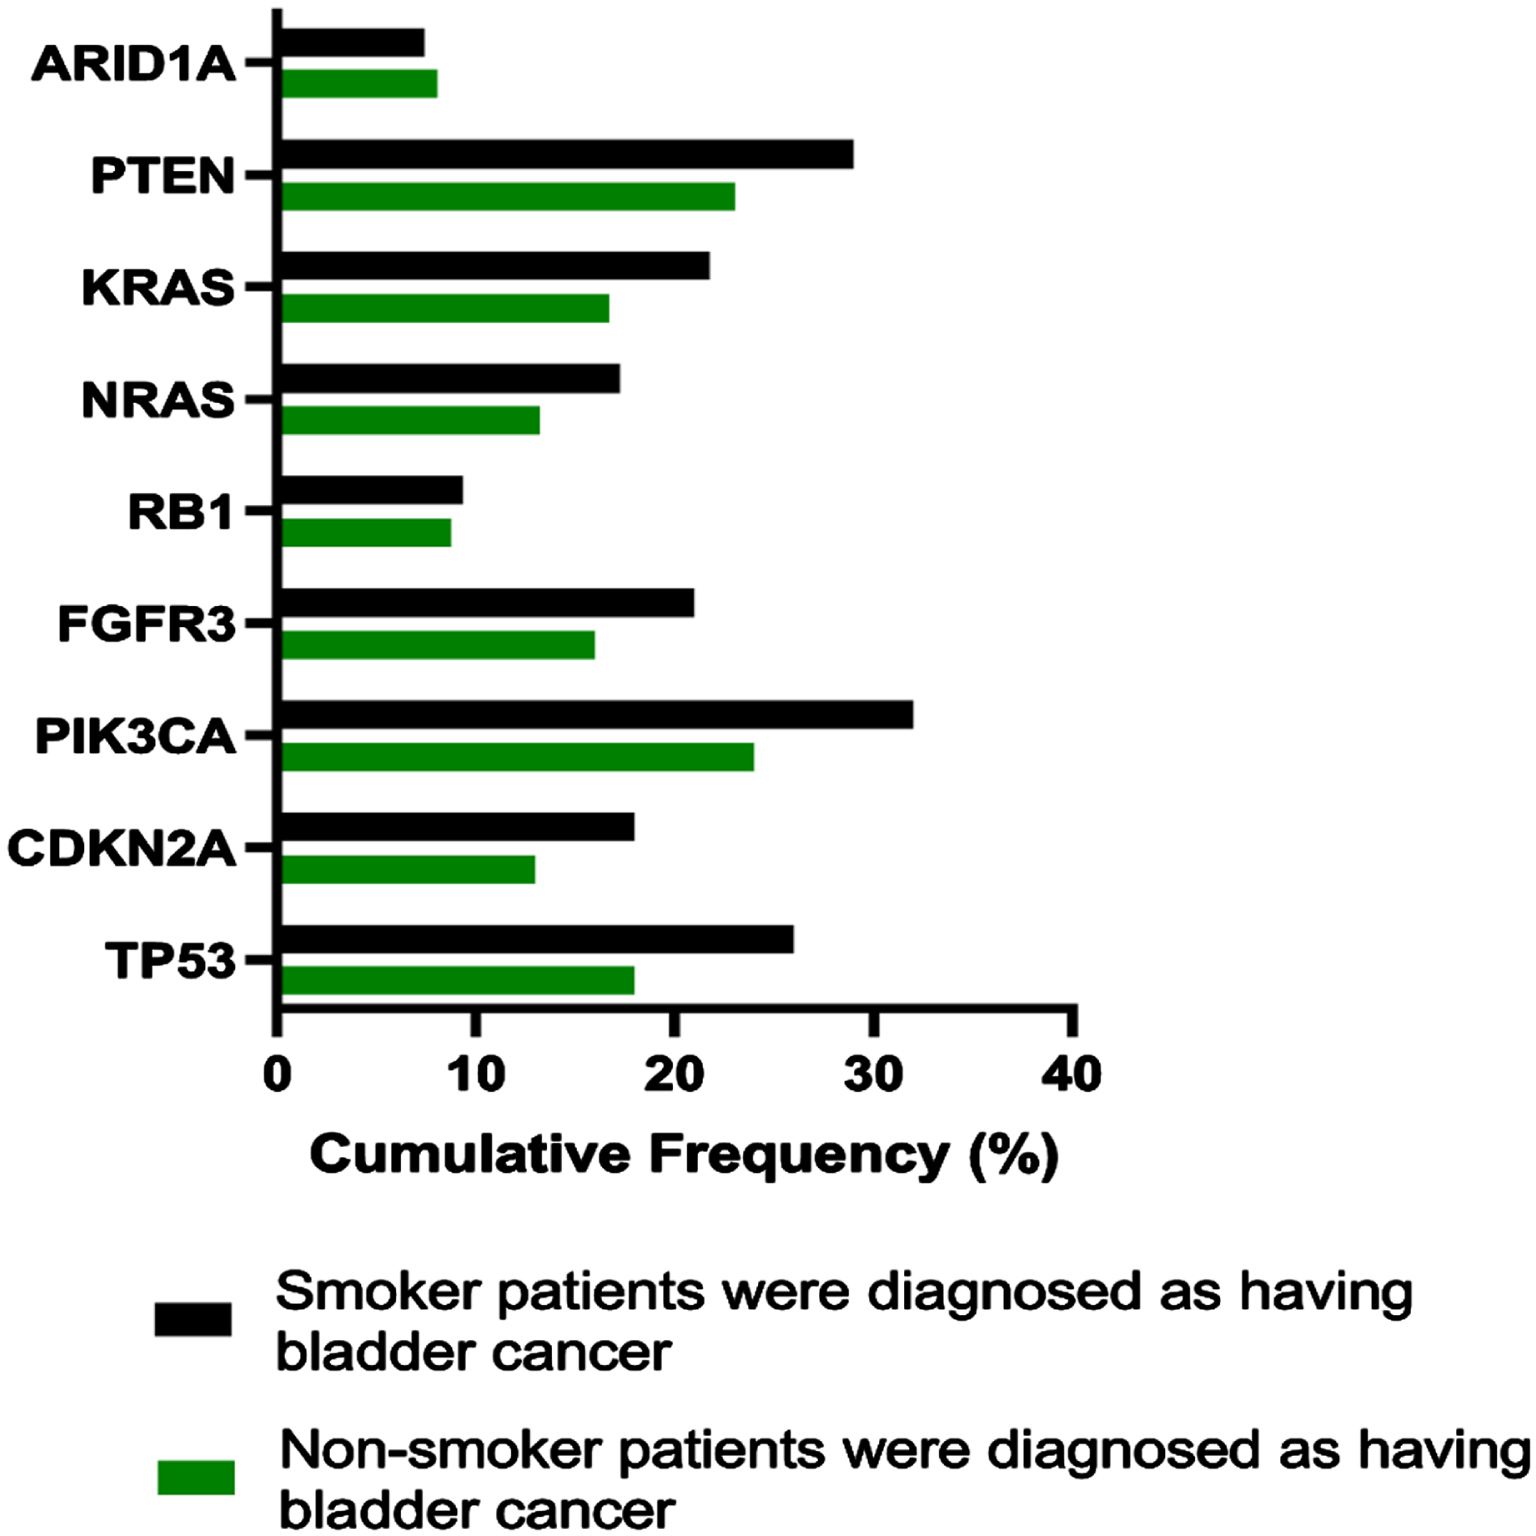 Identified somatic/biological mutations noticed in all coding exons of 9 cancer-associated genes through NGS technology; derived from non-smoking (green lines) and smoking (black lines) male participants diagnosed with BC.